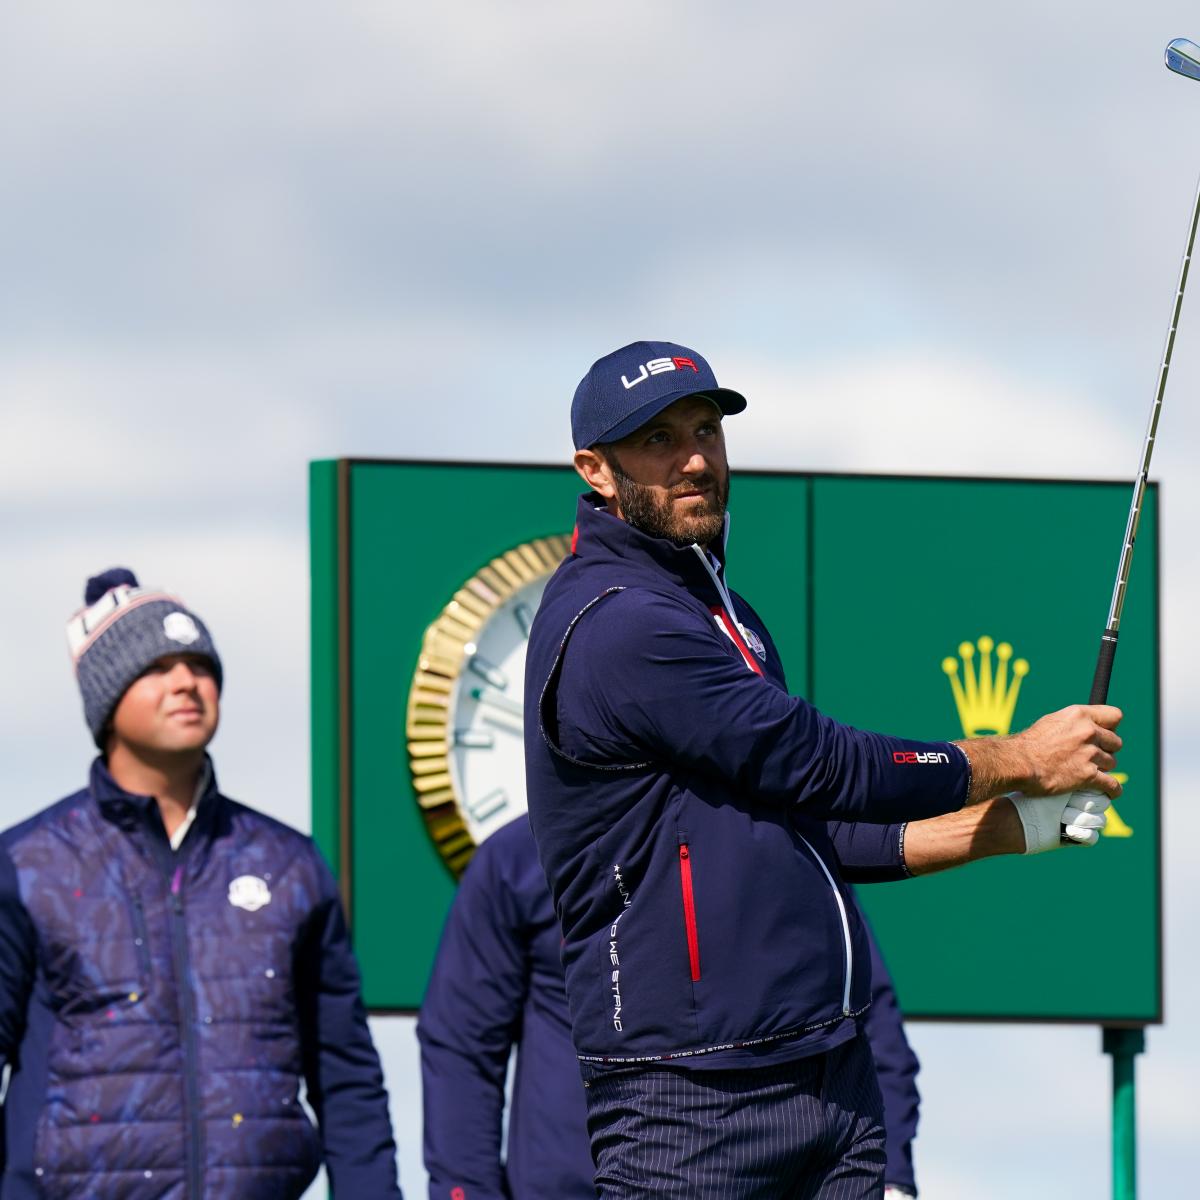 Ryder Cup 2021 Leaderboard Predicting Scores for Dustin Johnson and